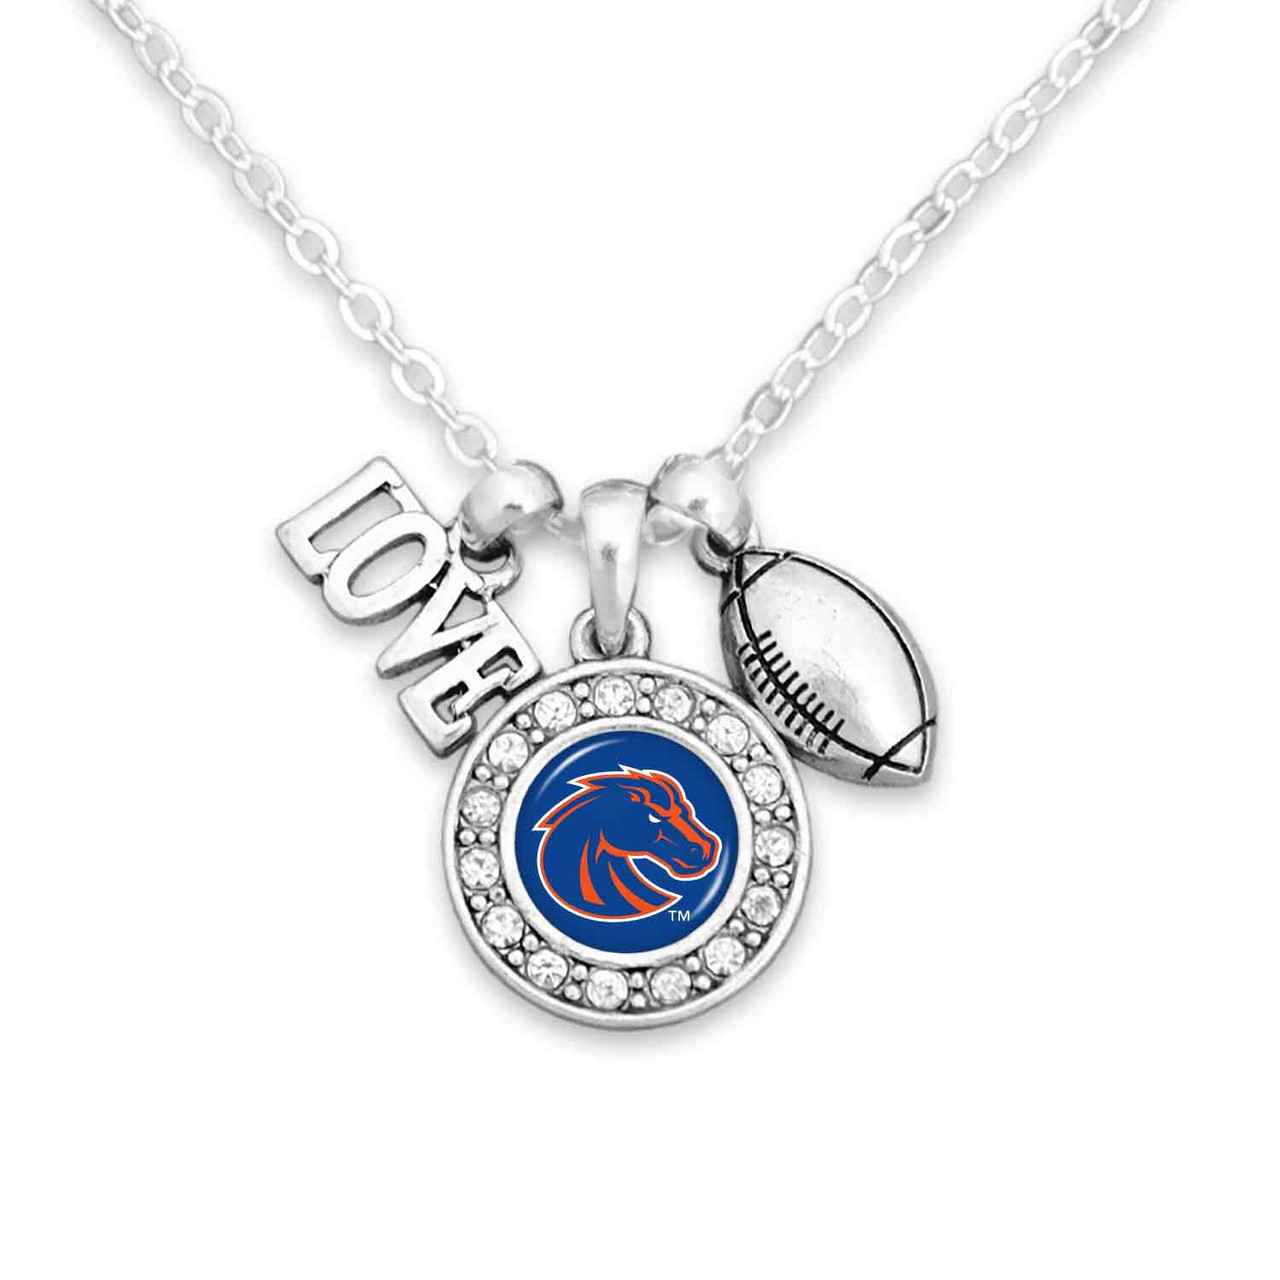 Boise State Broncos Necklace- Football, Love and Logo